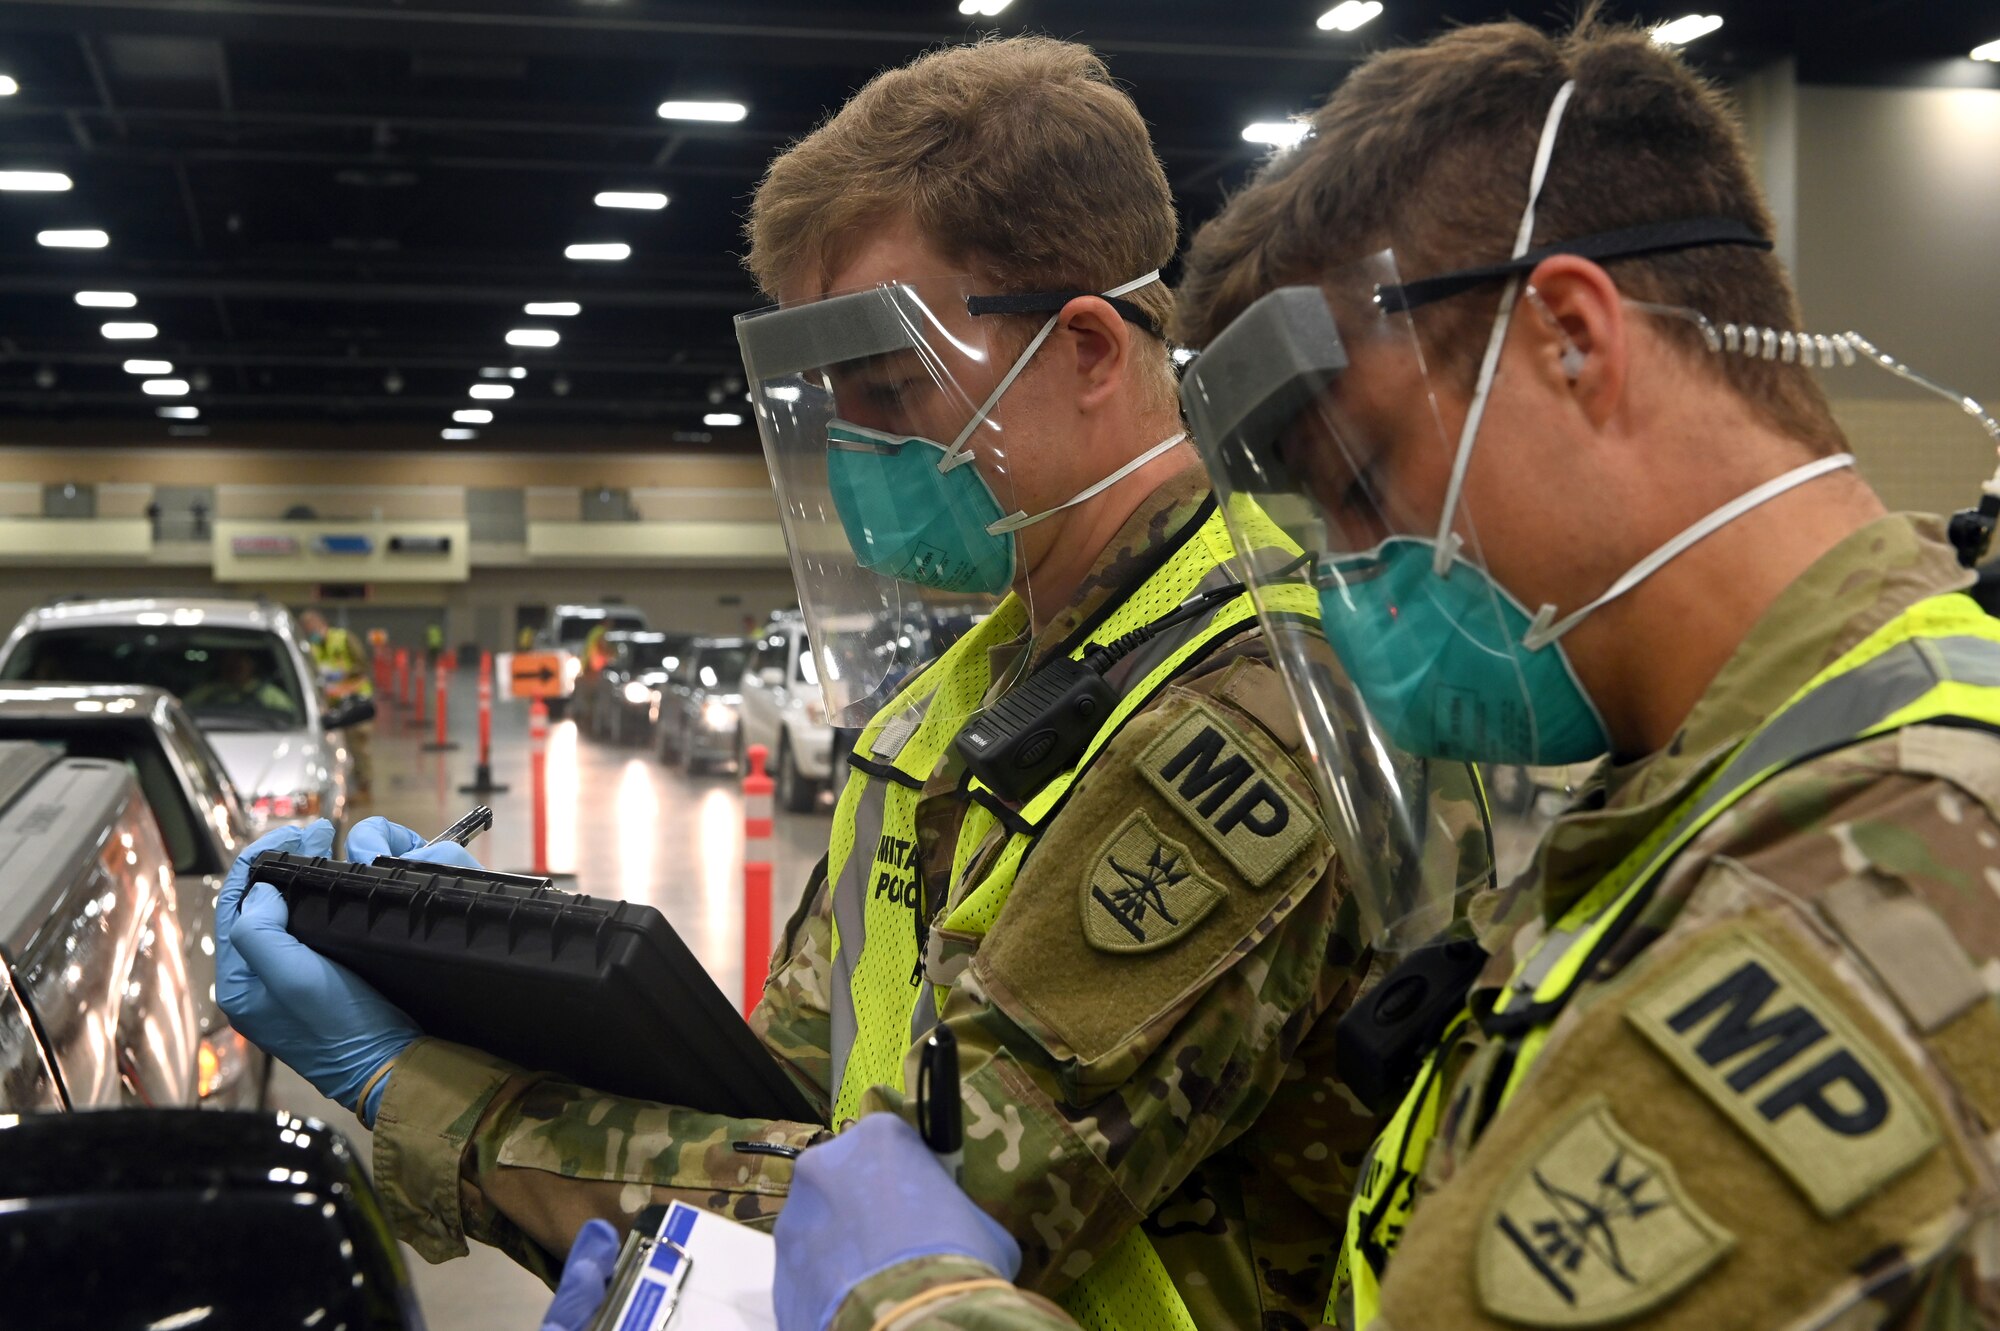 Sgt. Chase Bode, left, and Spc. Isaac Bolton of the 816th Military Police Company, North Dakota National Guard, collect data at the COVID-19 mobile testing site inside the Bismarck Event Center in Bismarck, North Dakota, May 2, 2020. The NDNG marked the one-year anniversary of its support of the pandemic response March 16, 2021.